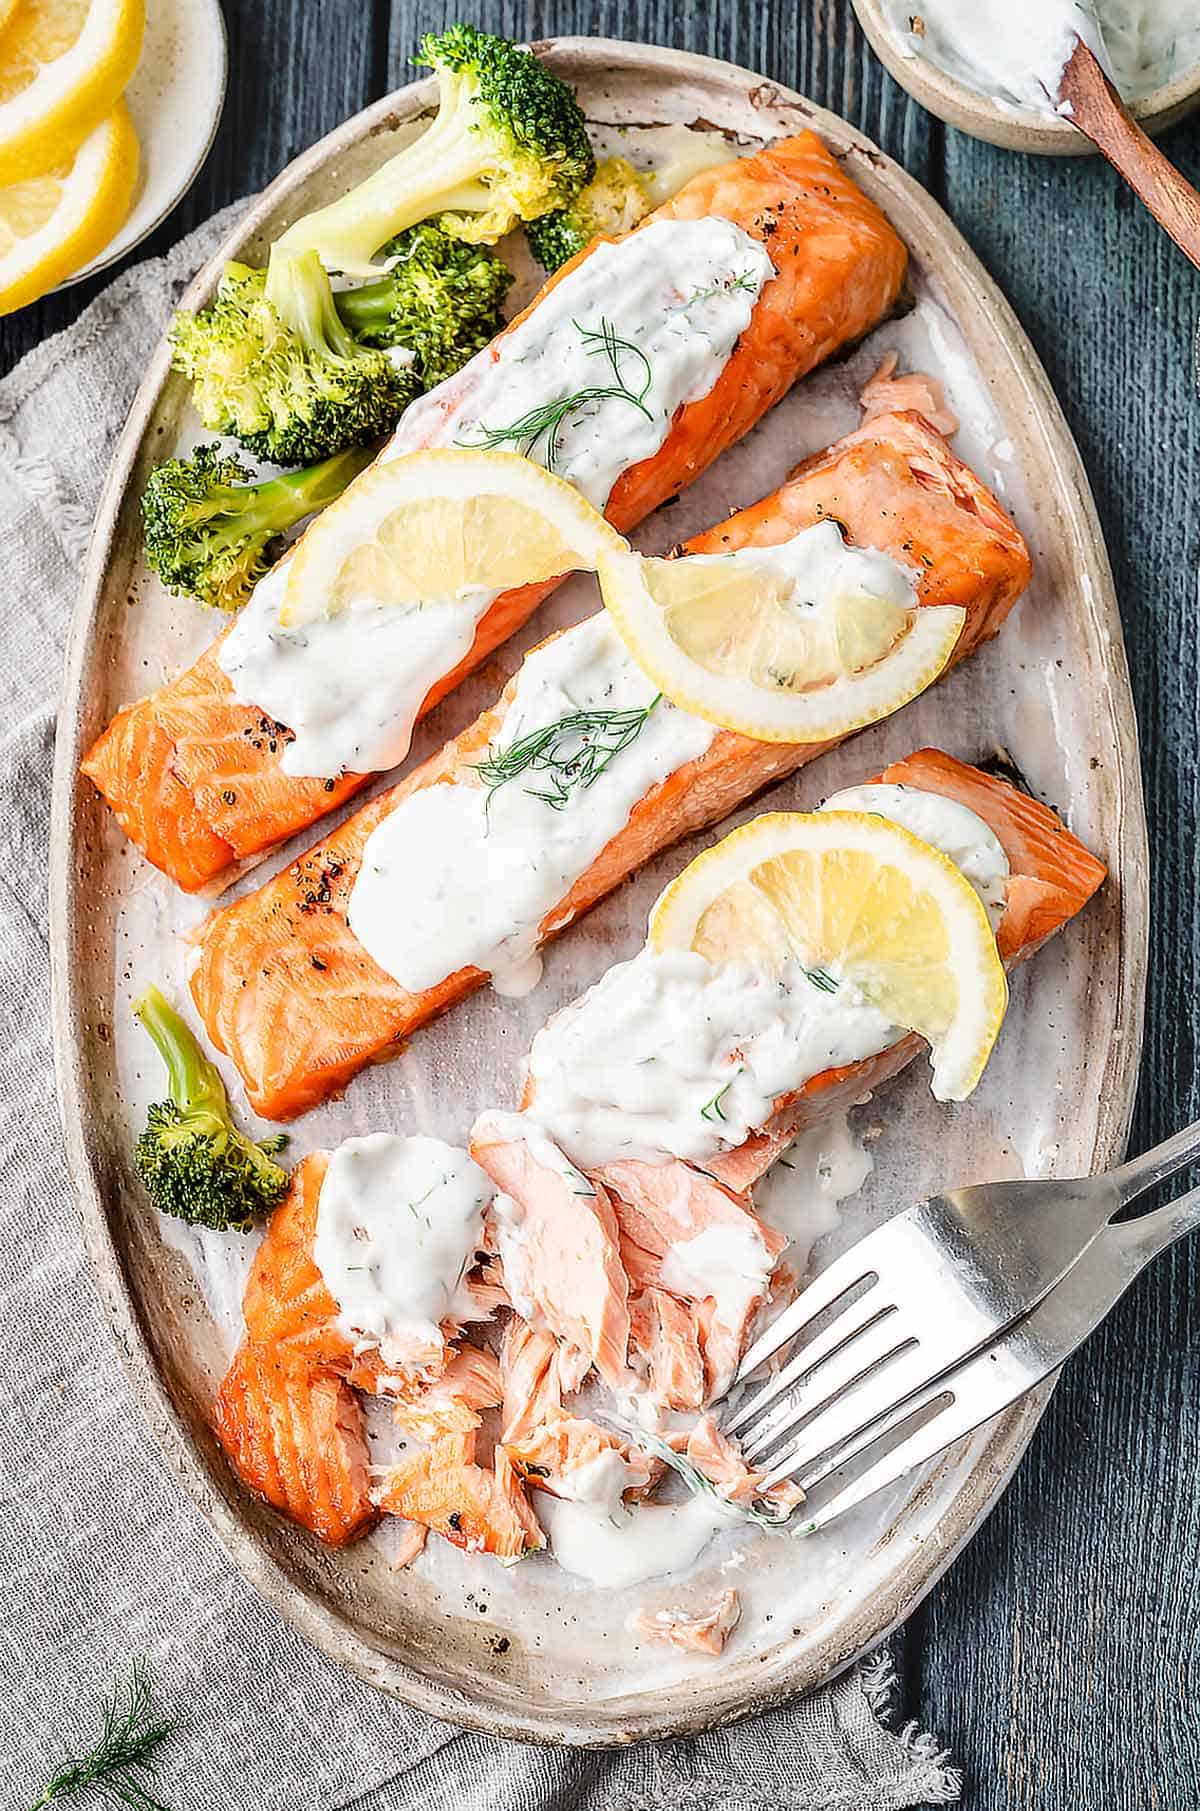 Air fried salmon fillets are topped with a creamy dill sauce and served on a platter with steamed broccoli.